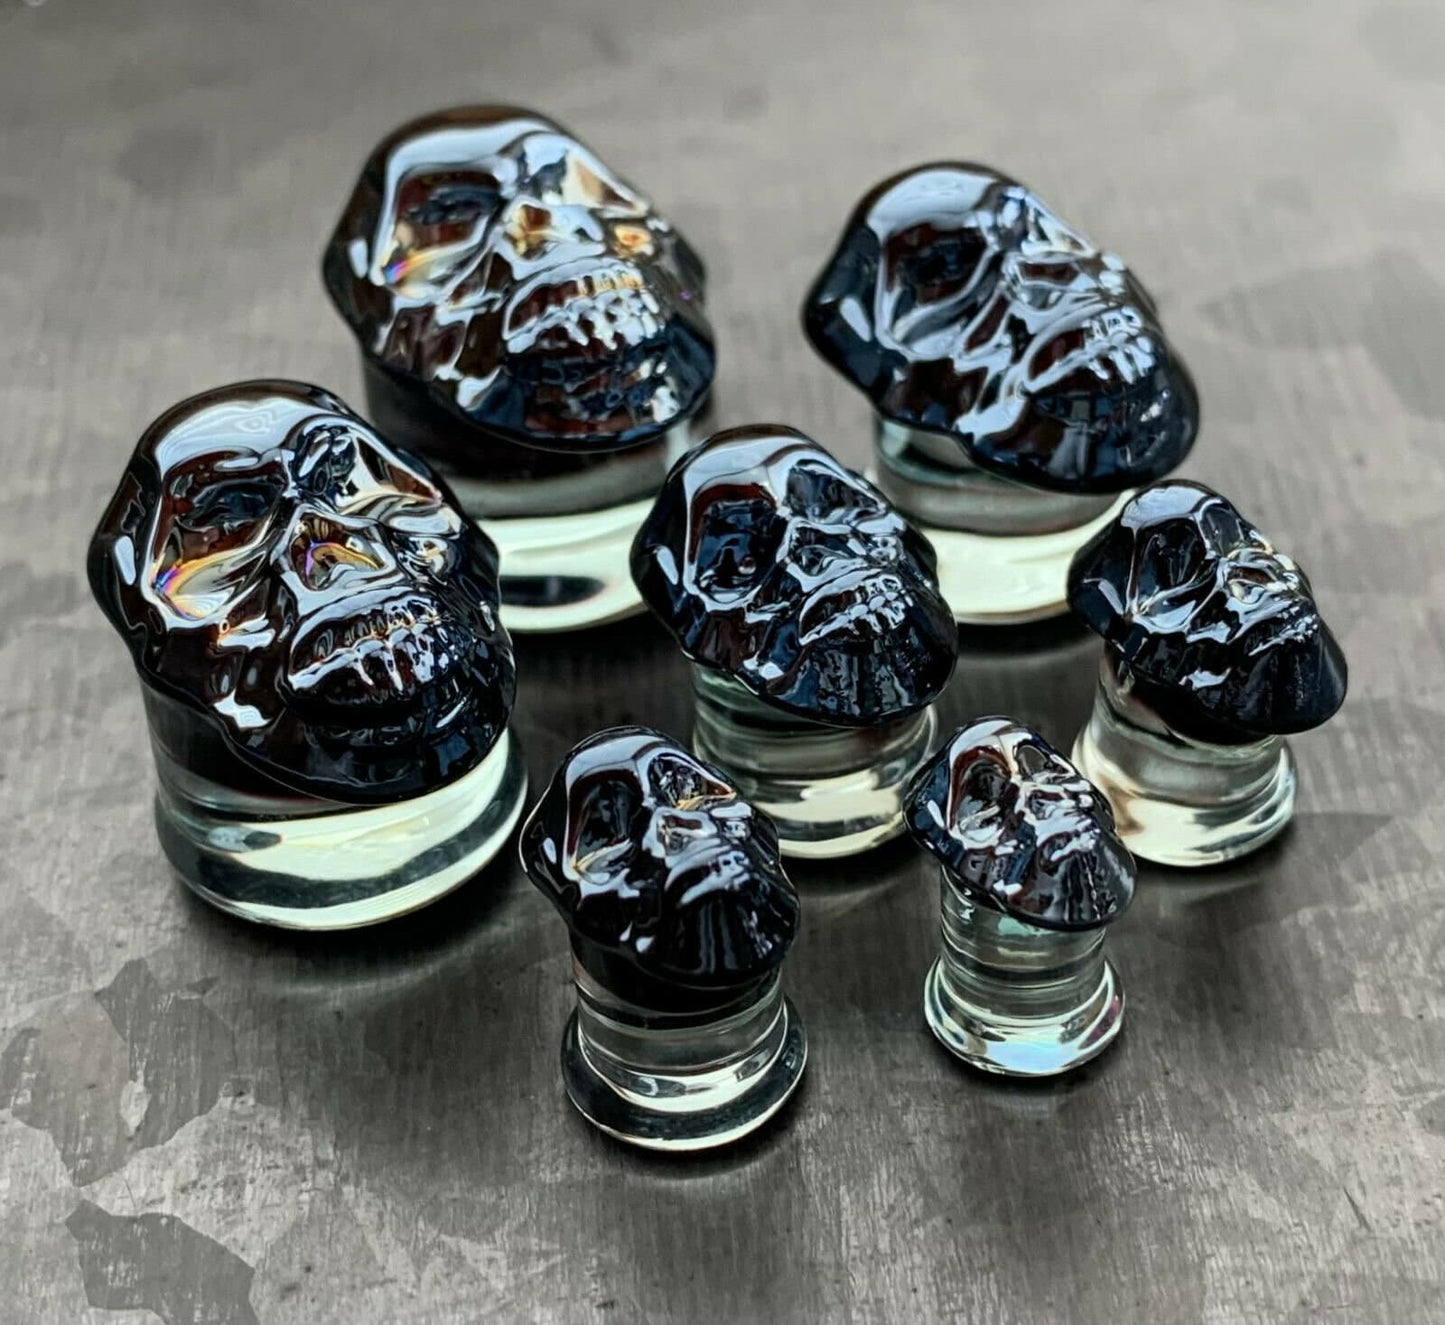 PAIR of Unique Metallic Skull Pyrex Glass Double Flare Plugs/Tunnels - Gauges 2g (6mm) through 5/8" (16mm) available!